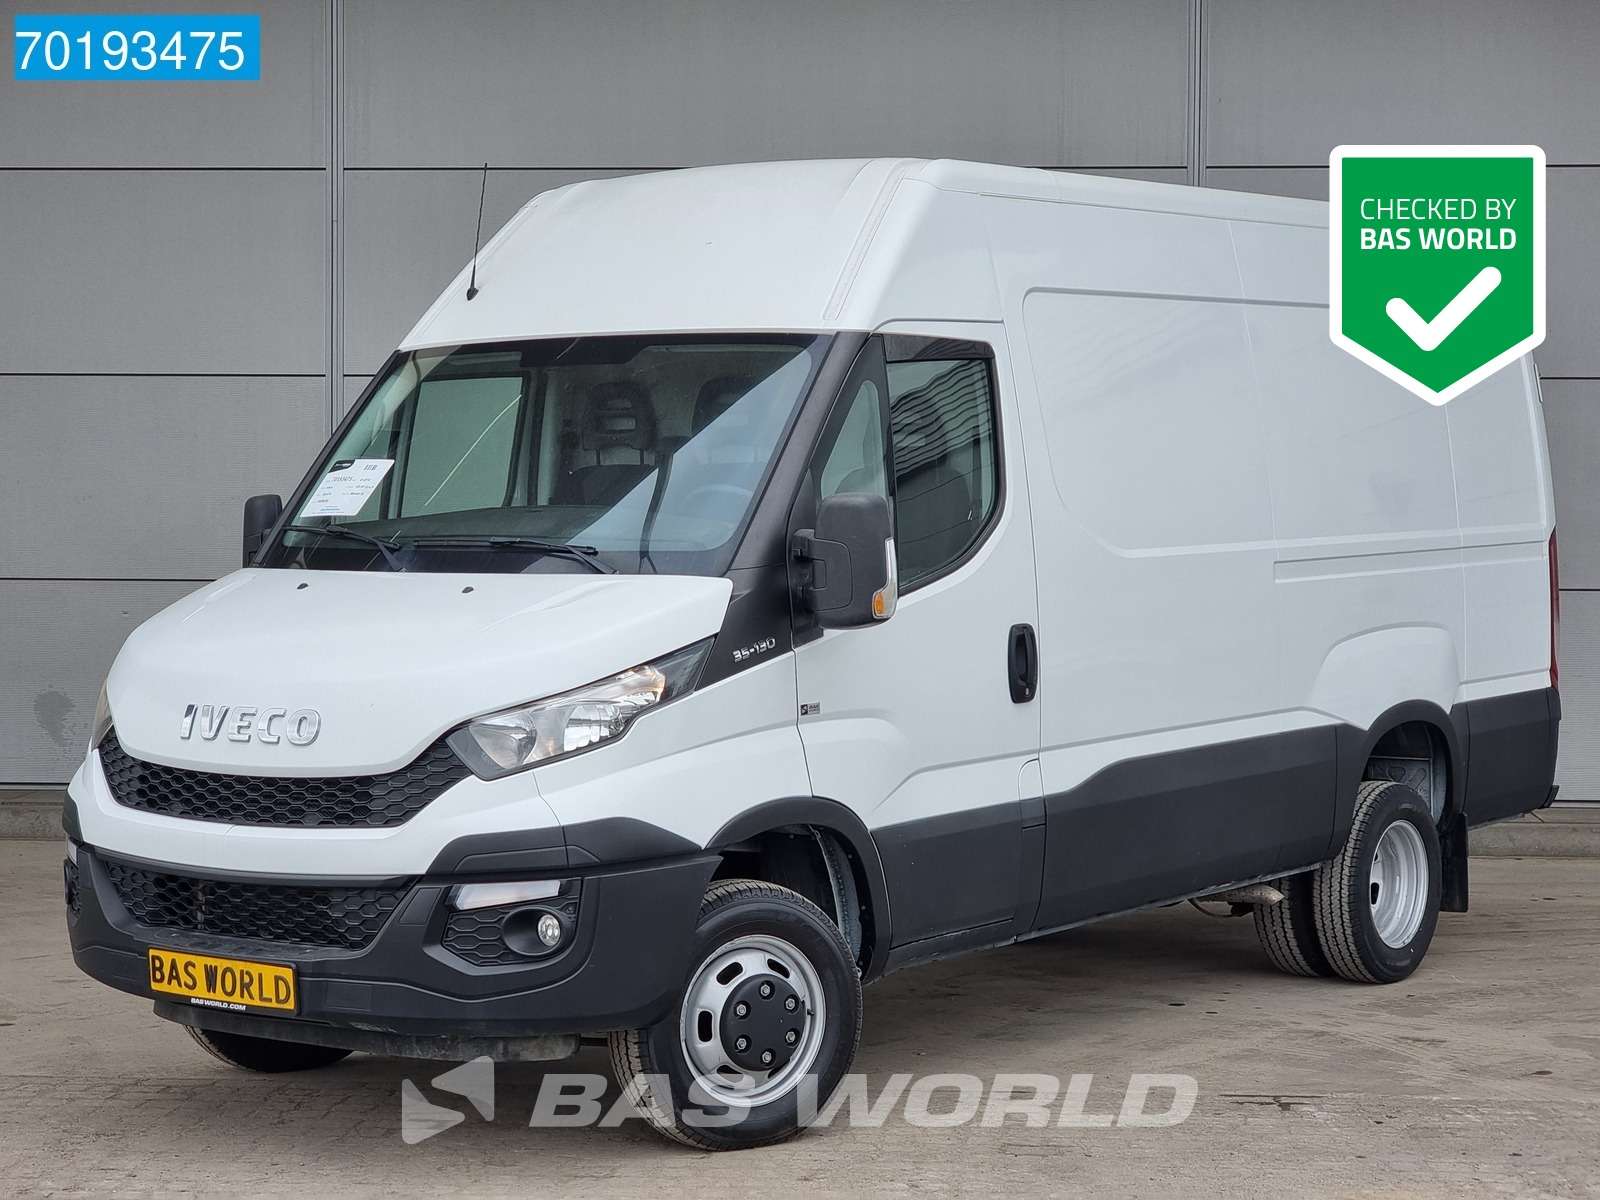 Iveco Daily Transporter in White used in VEGHEL for € 21,538.-